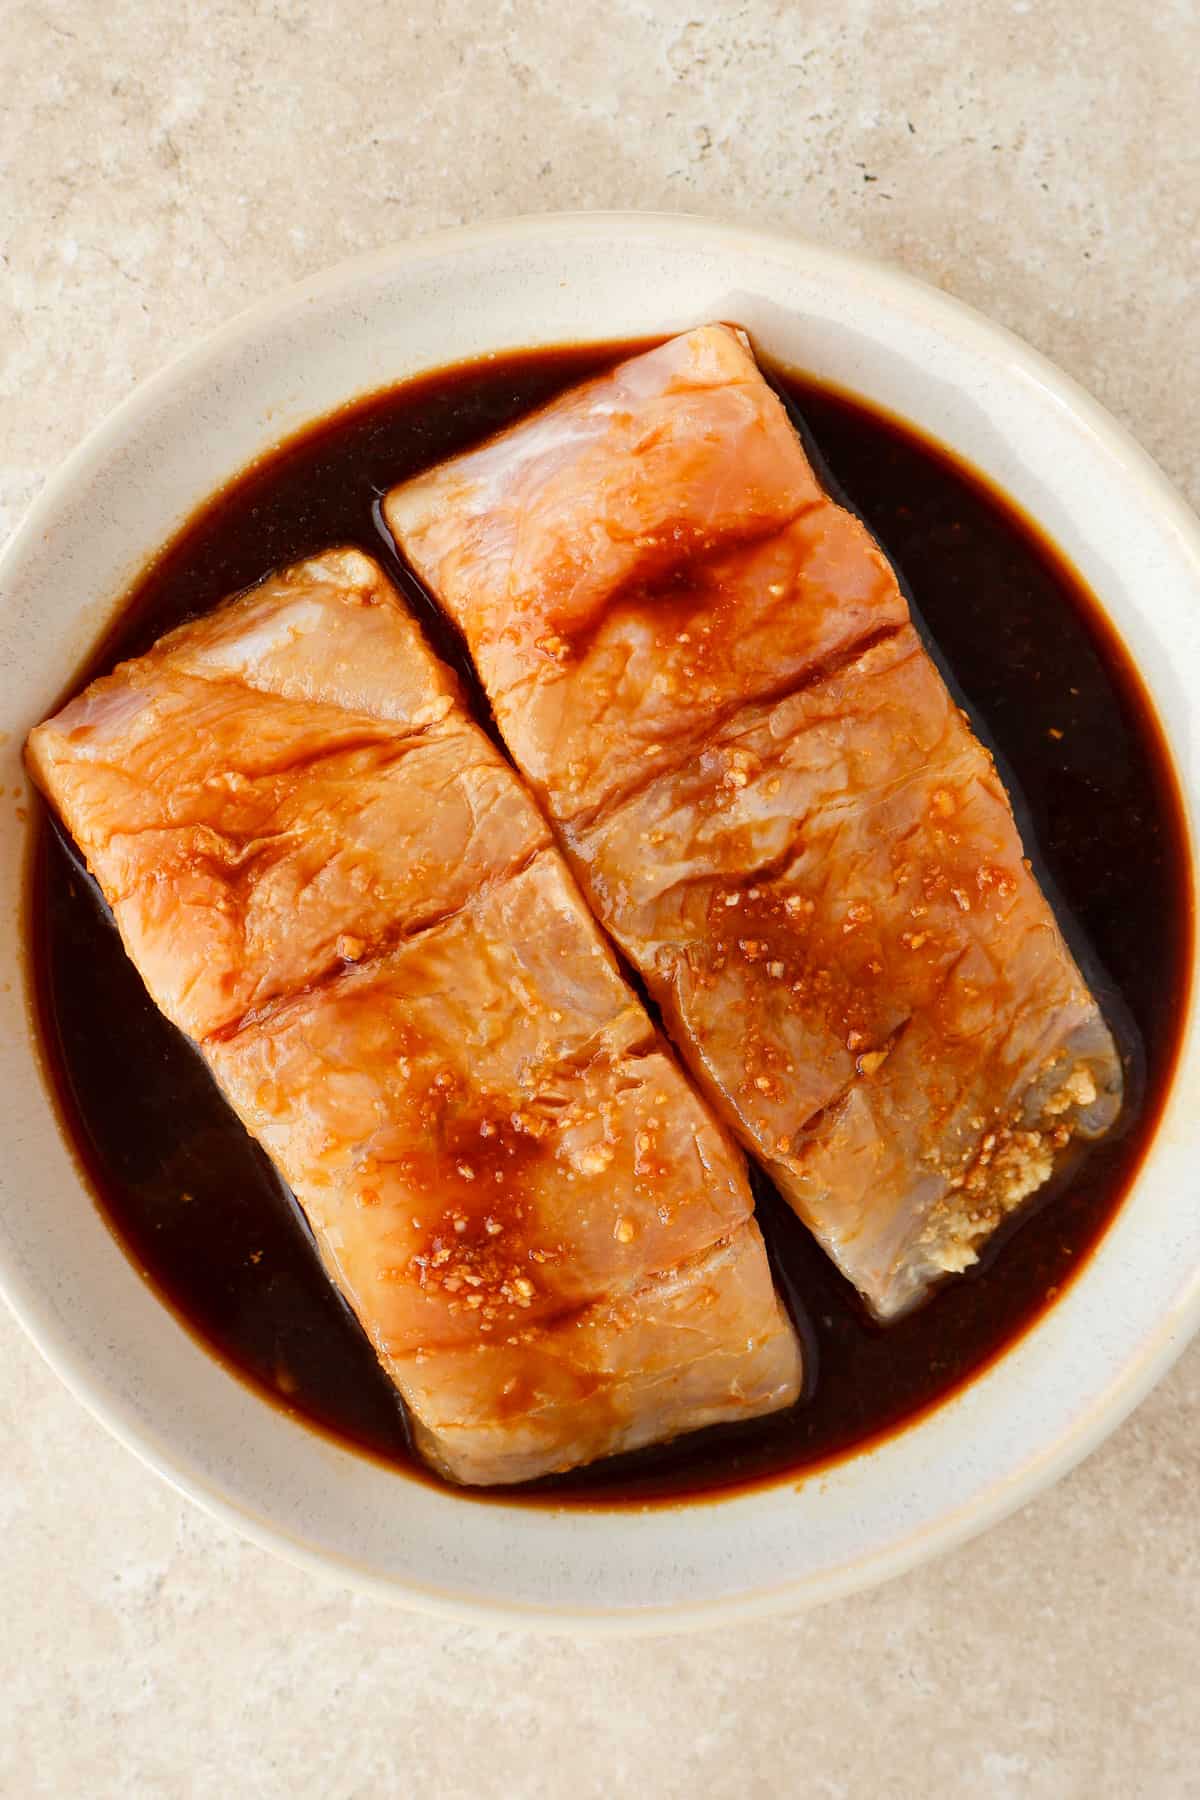 Barramundi fish fillets in a bowl marinating in soy sauce.